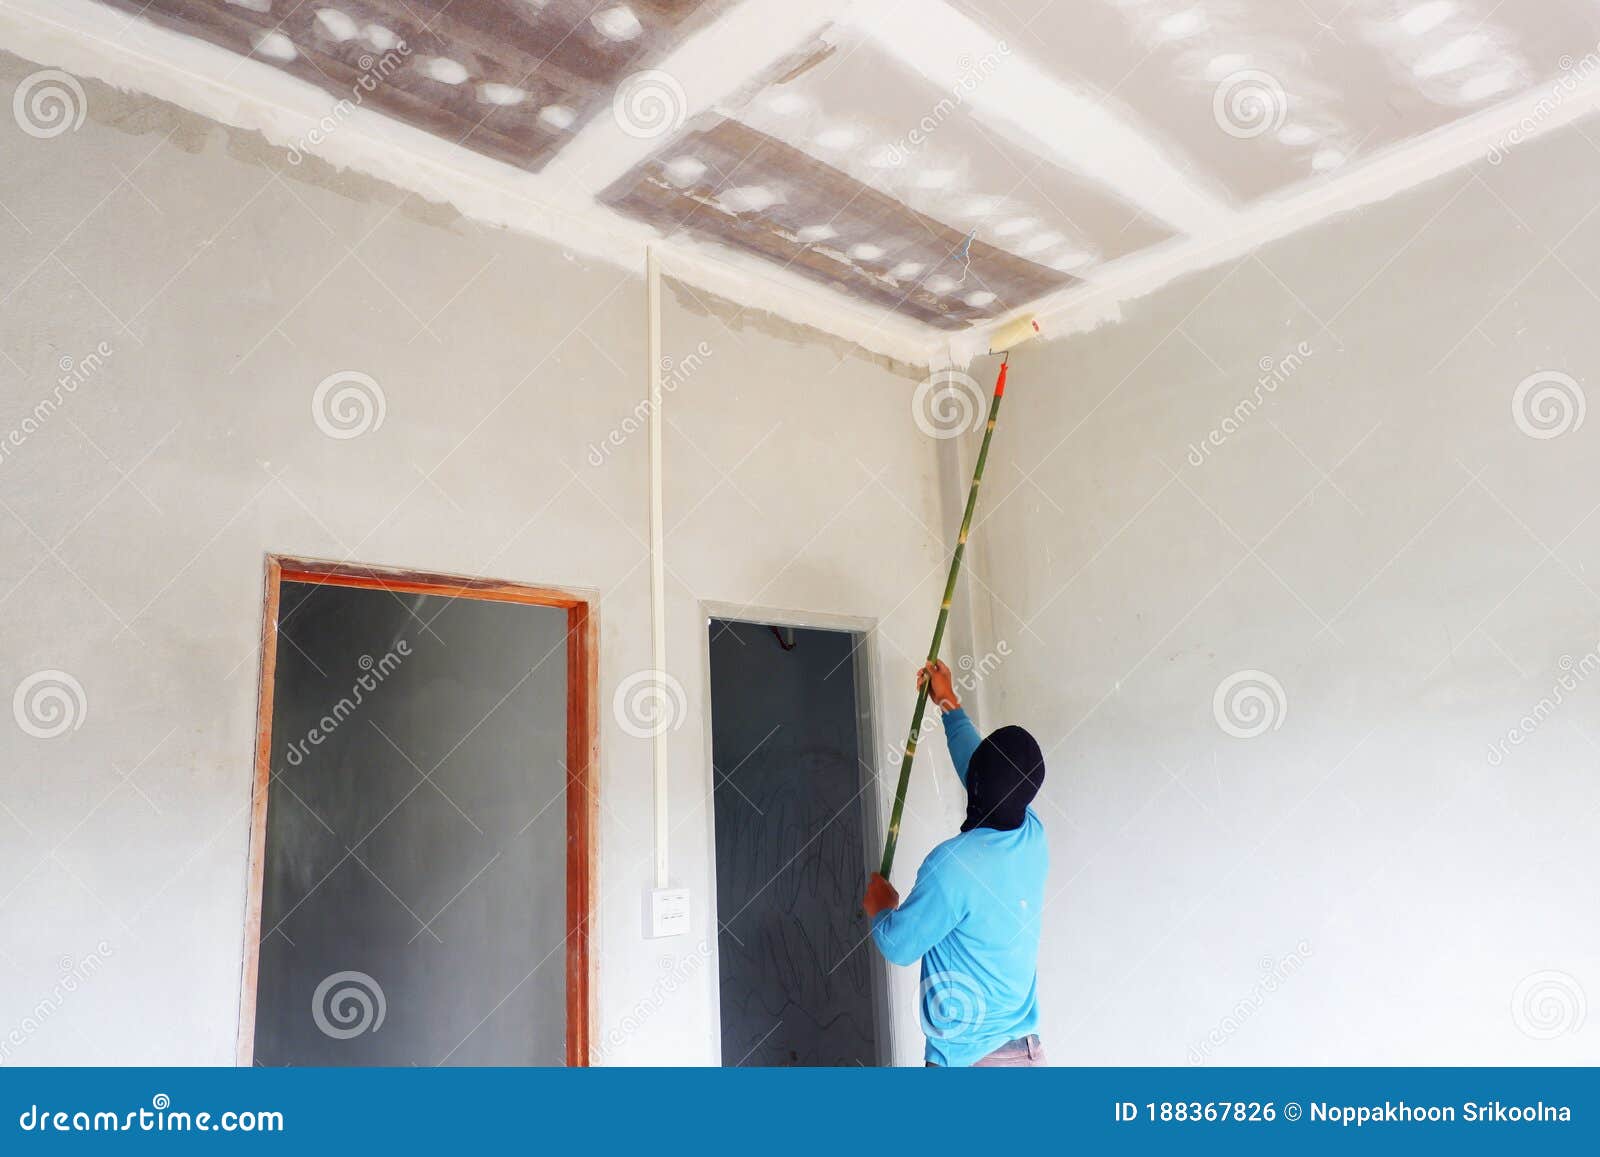 painters are painting the ceiling of a new home